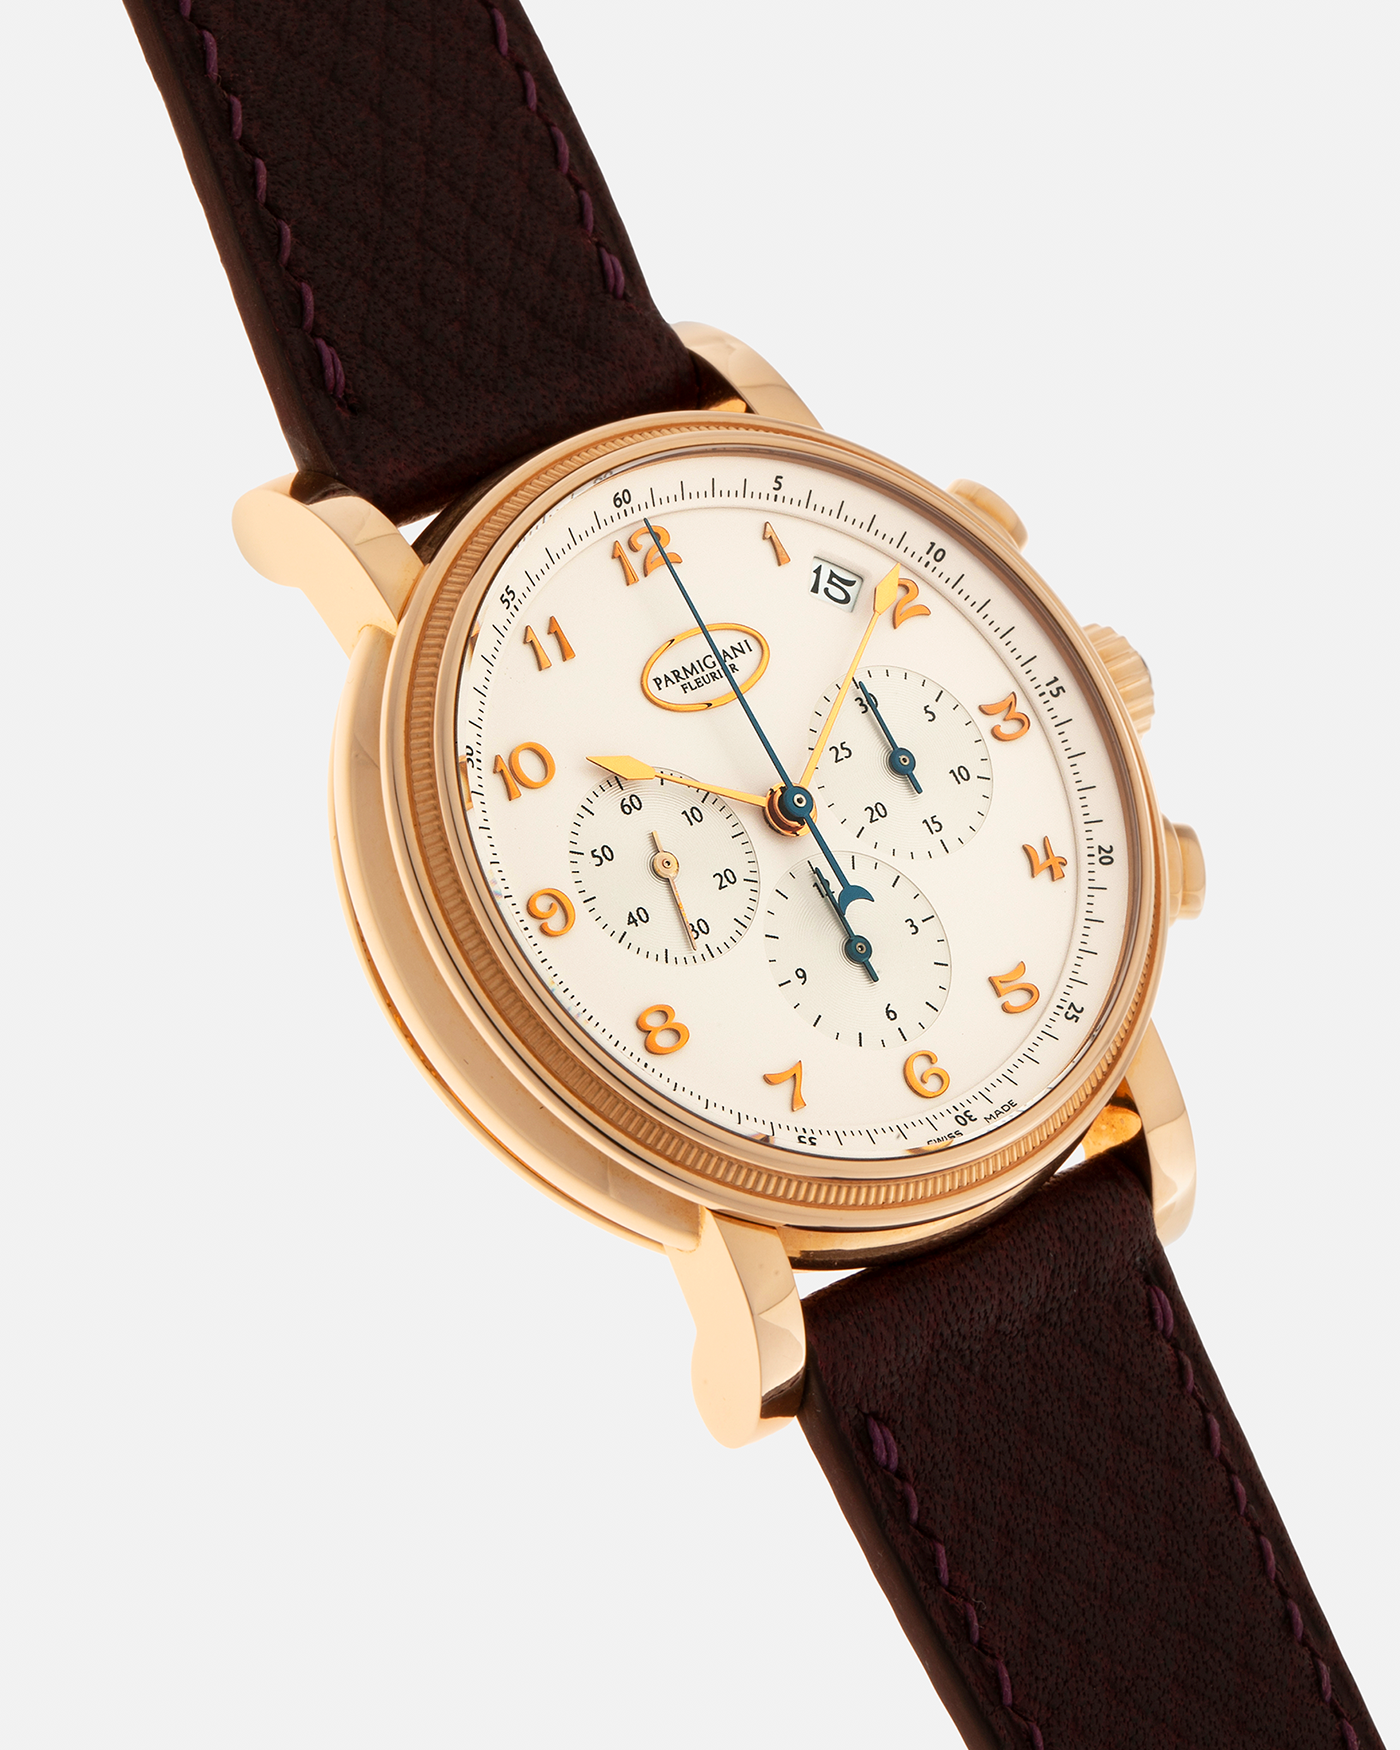 Brand: Parmigiani Fleurier Year: 2000s Model: Toric Chronograph Material: 18-carat Rose Gold Movement: Parmigiani Fleurier Cal. PF 190 (Based on the Zenith El Primero 400z), Self-Winding Case Diameter: 39.5mm Lug Width: 20mm Strap: Delugs Burgundy Textured Calf Leather with Signed 18-carat Rose Gold Tang Buckle